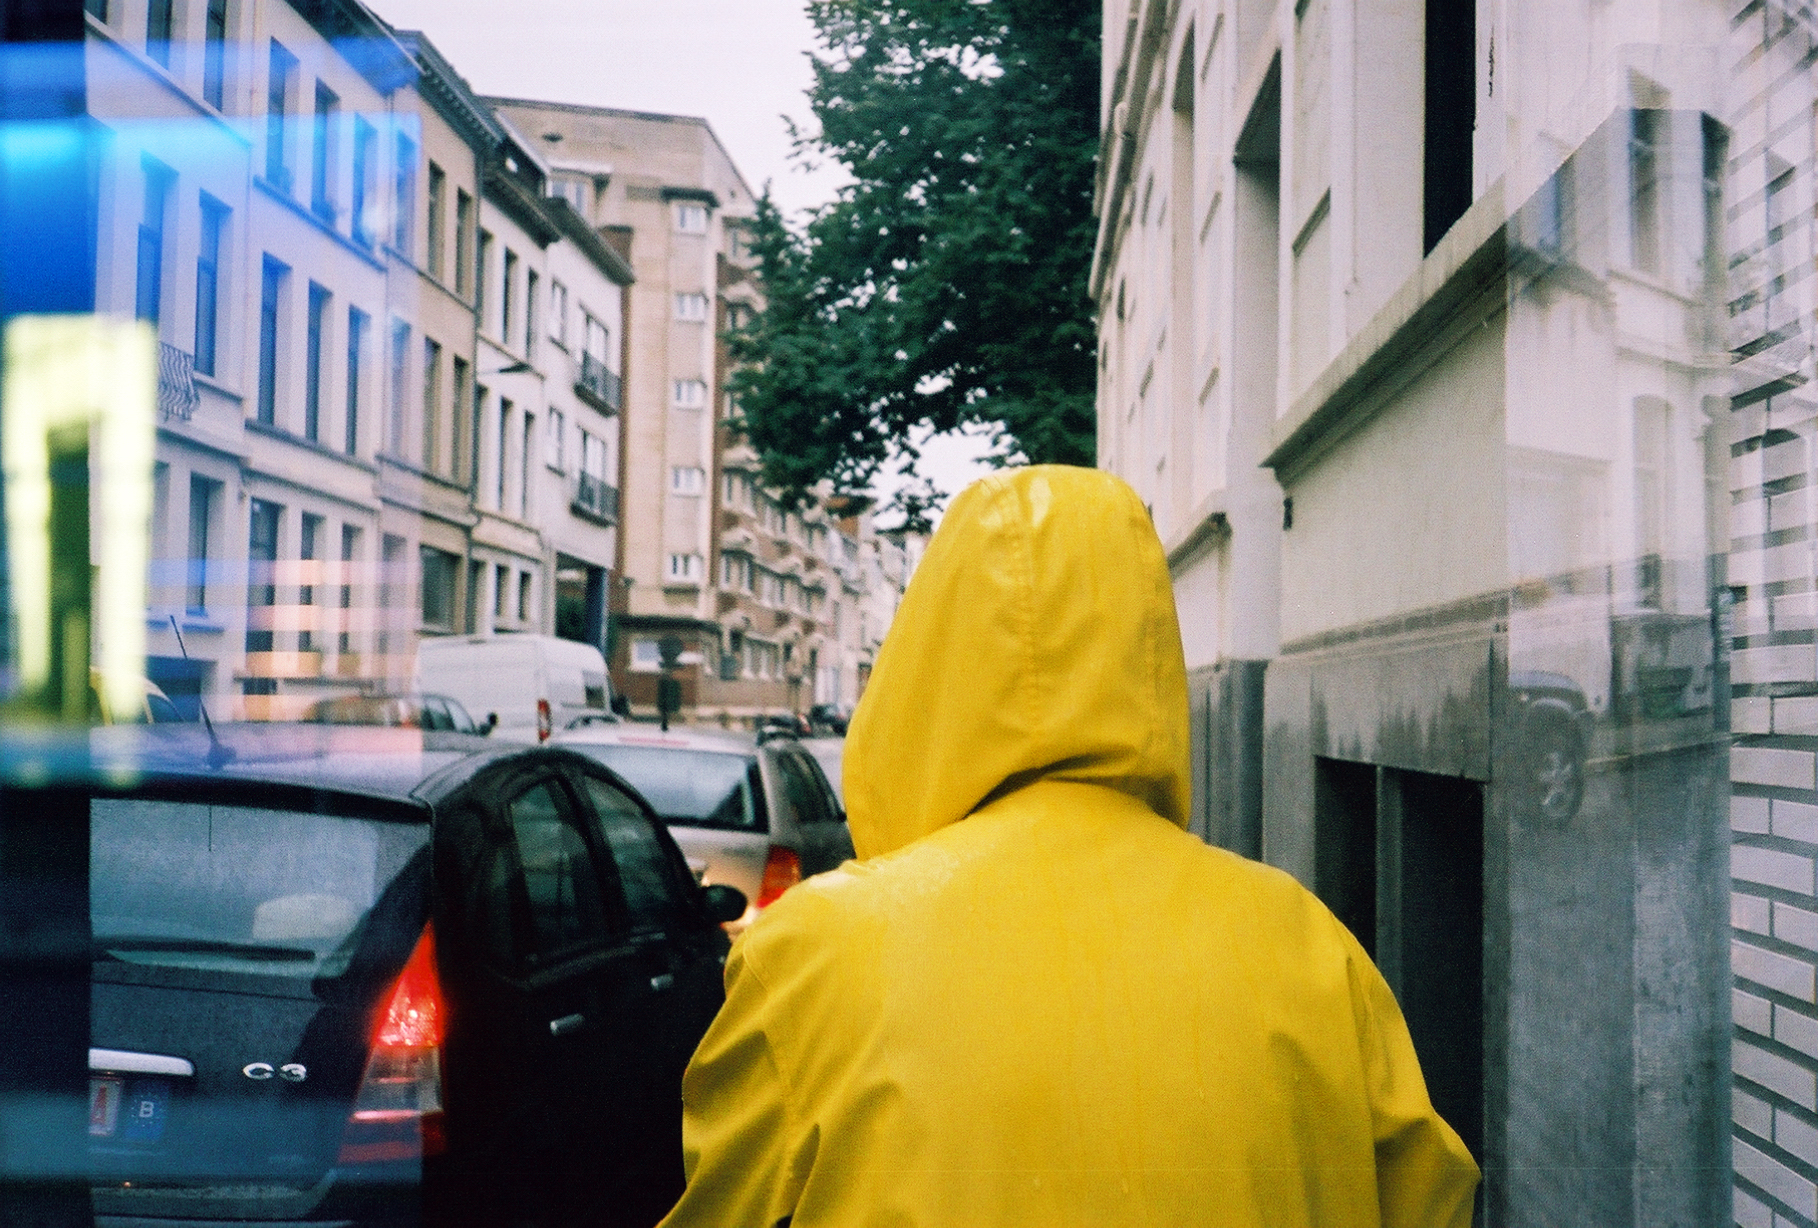 the back of a person's head who is wearing yellow raincoat hood